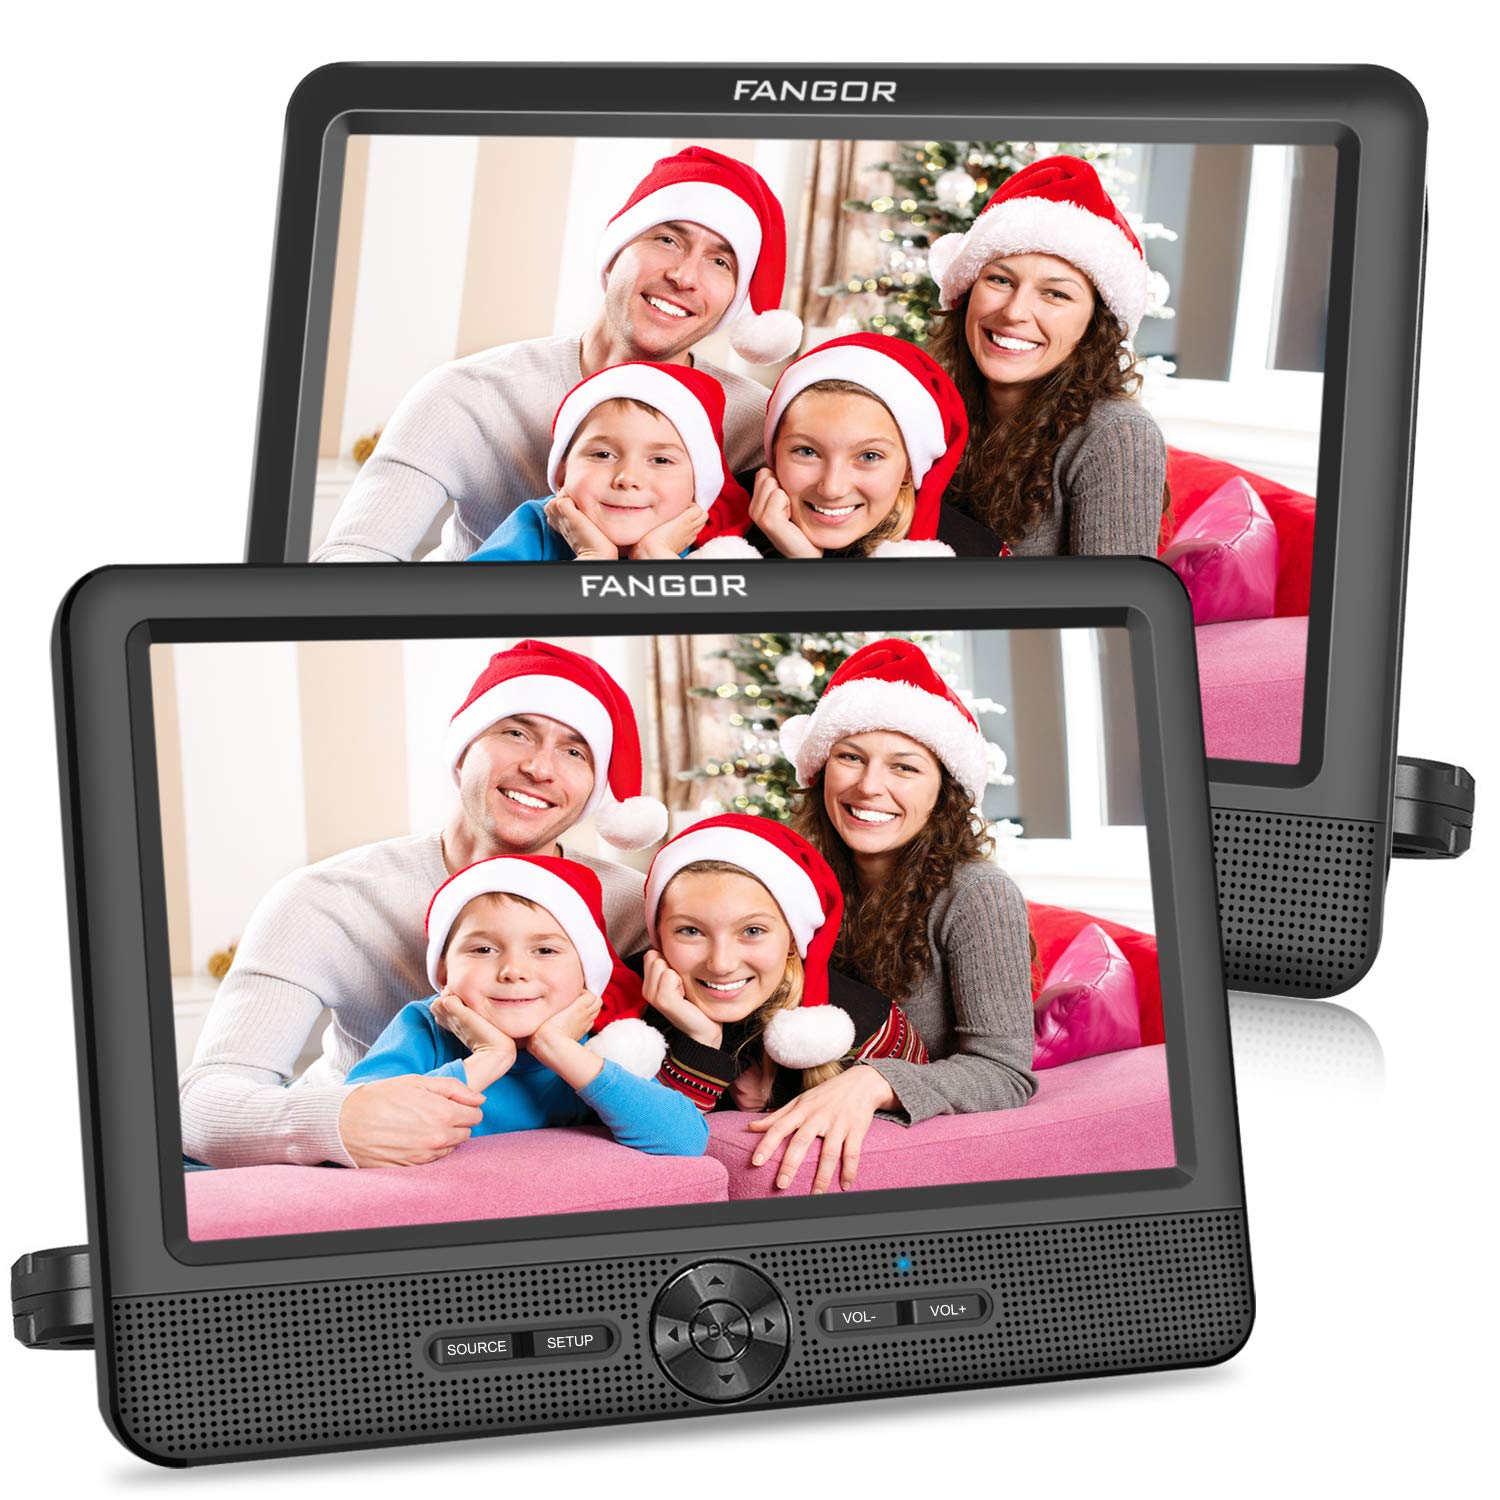 FANGOR 10’’ Dual Car DVD Player, Portable Headrest DVD Players with 2 Mounting Brackets, 5 Hours Rechargeable Battery, Last Memory, Free Regions, USB/SD/Sync TV, AV Out&in ( 1 Player + 1 Monitor )